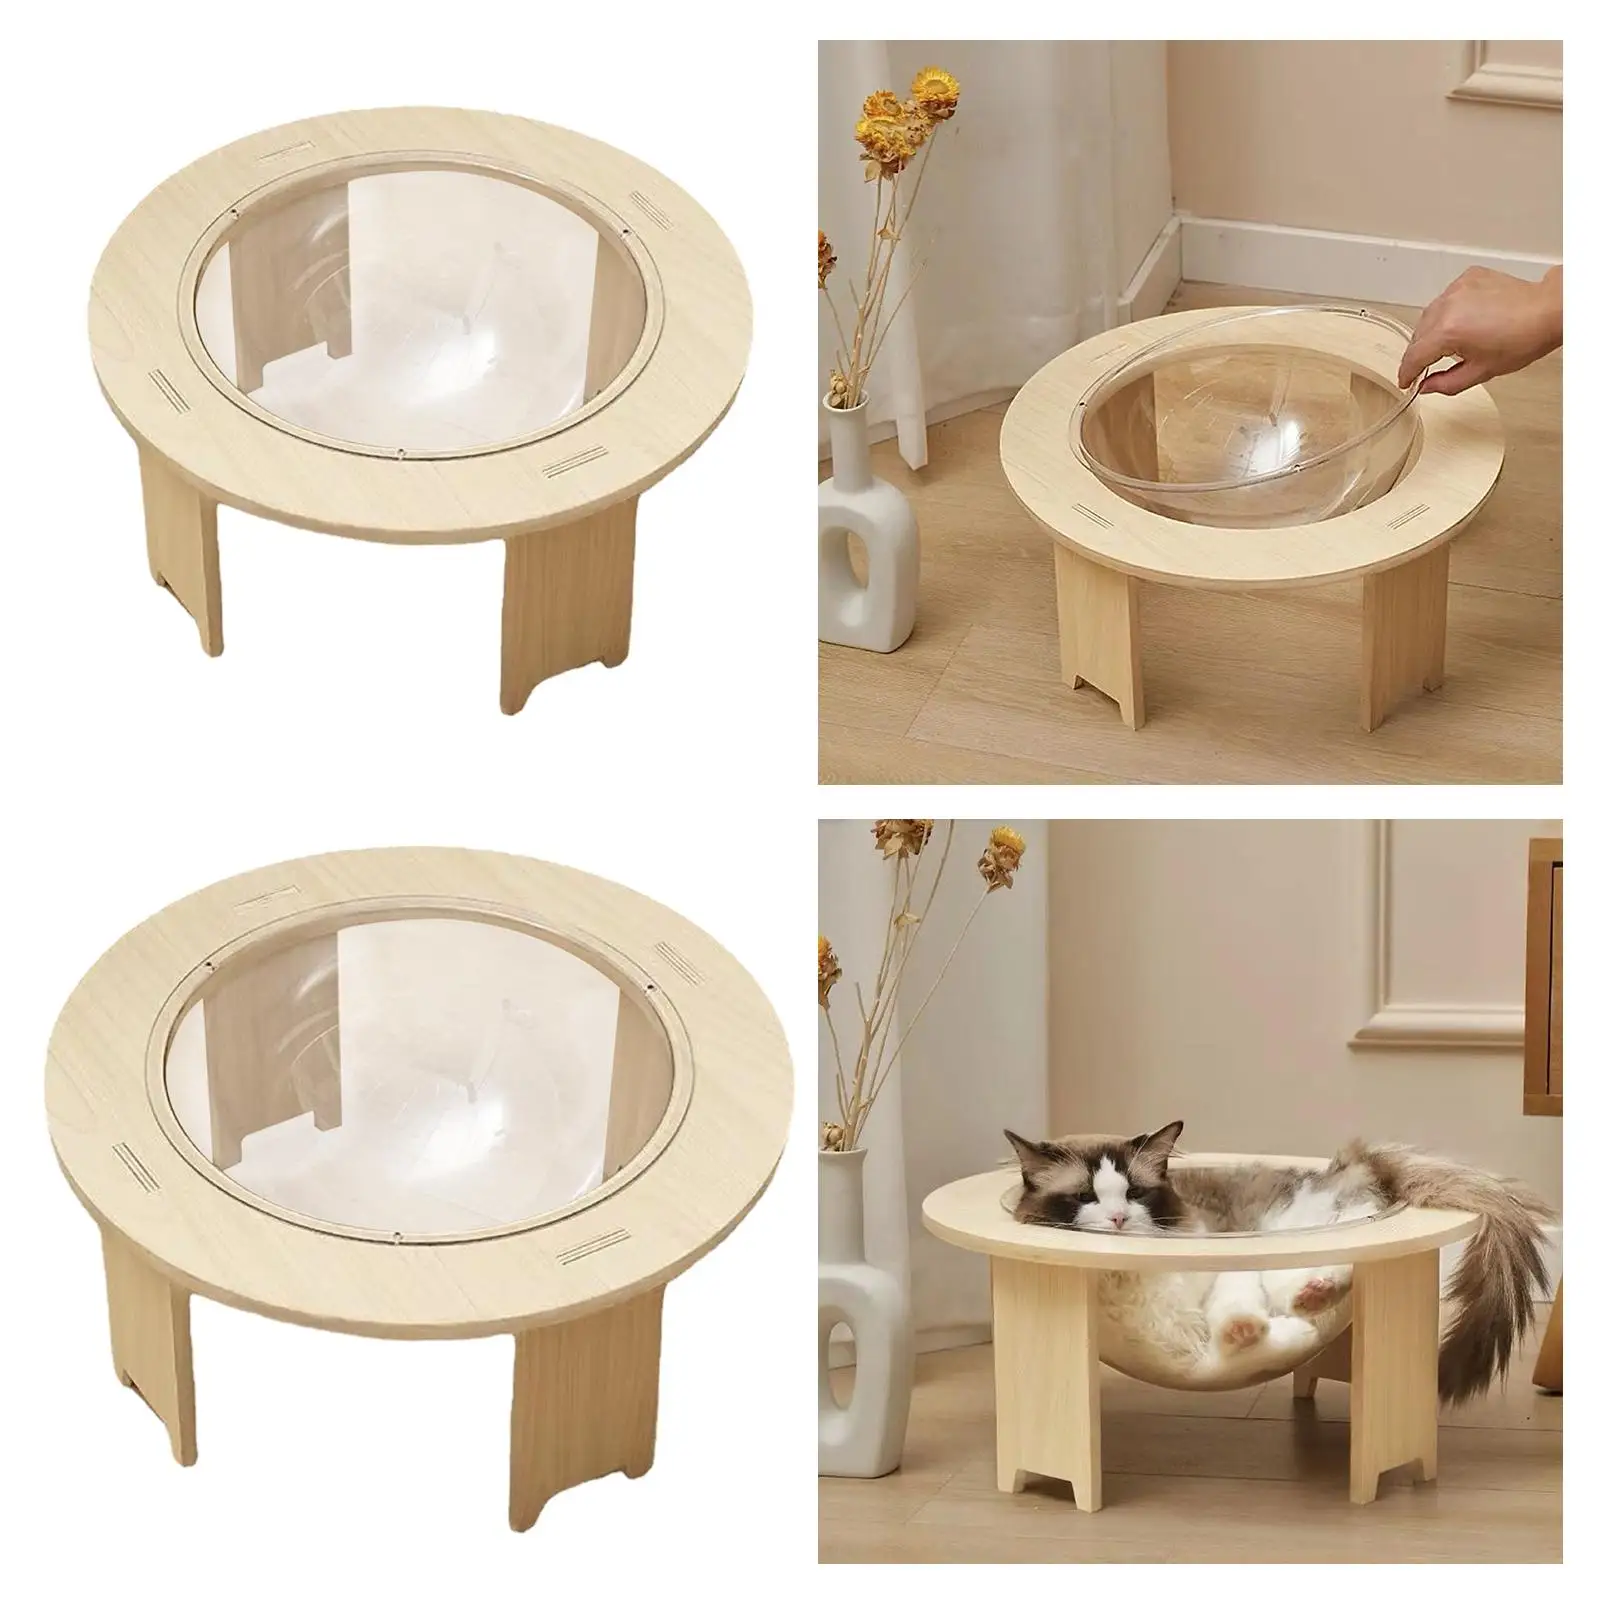 Indoor Space Capsule Cat Bed Cat Sleeping Nest Universal Stable Removable